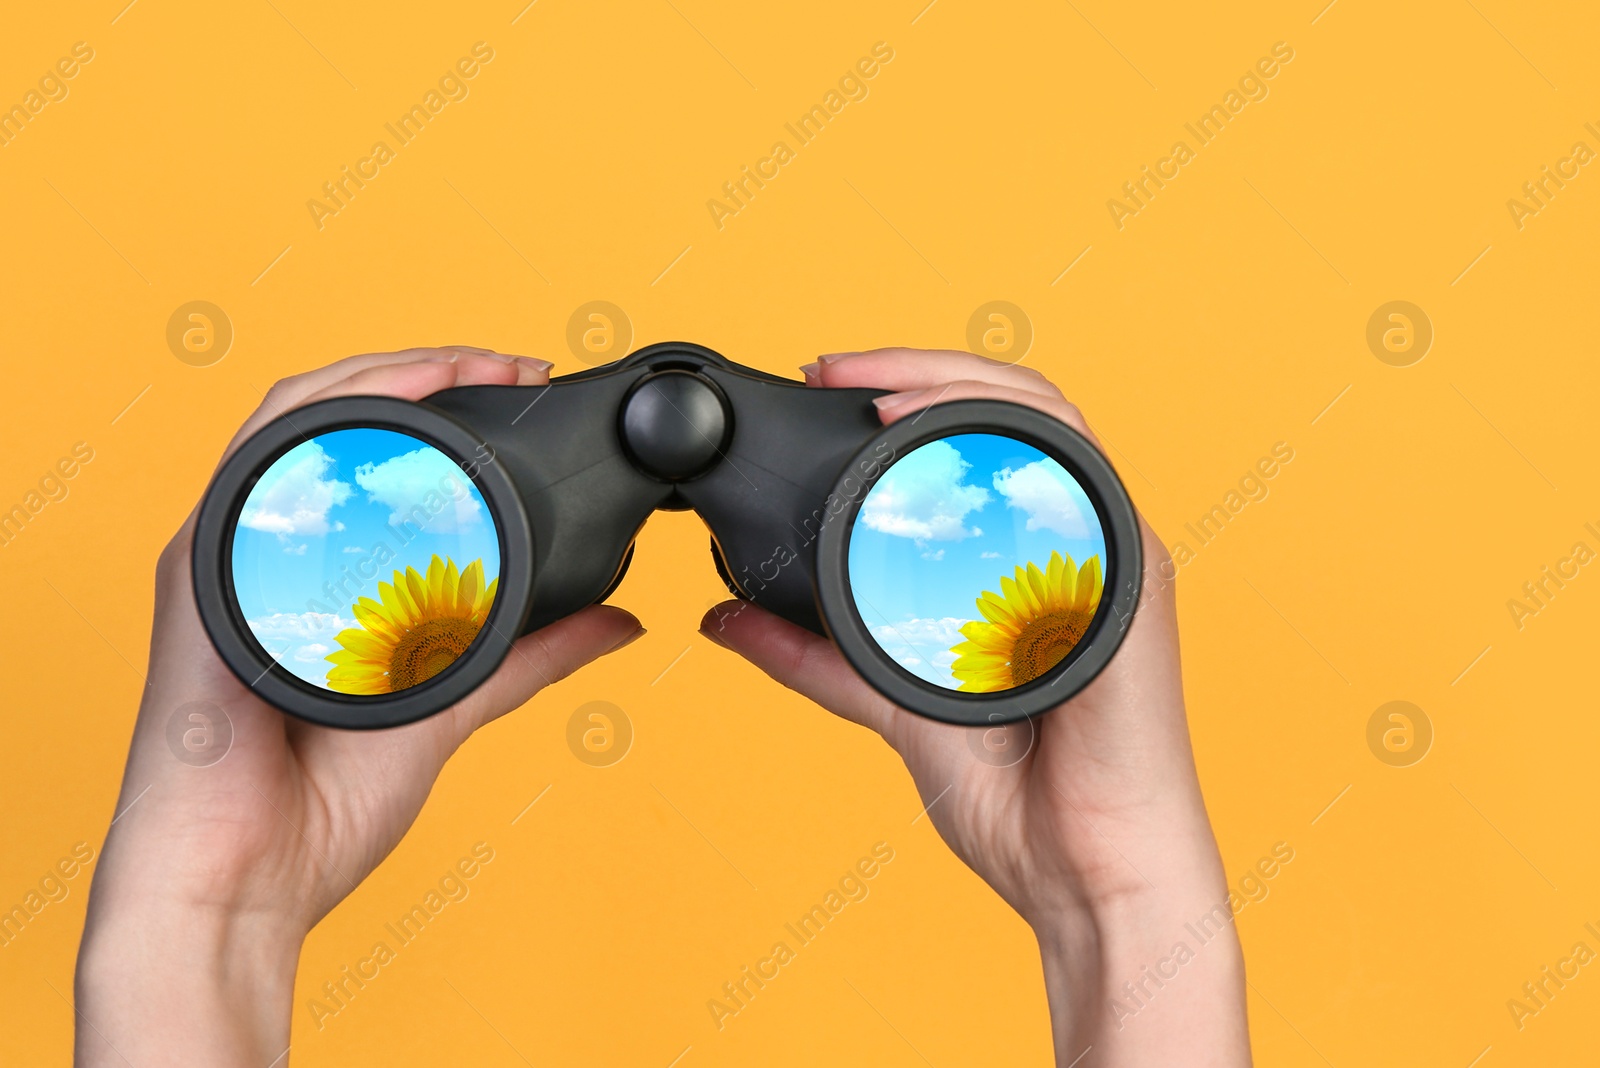 Image of Woman holding binoculars on yellow background, closeup. Sunflower reflecting in lenses